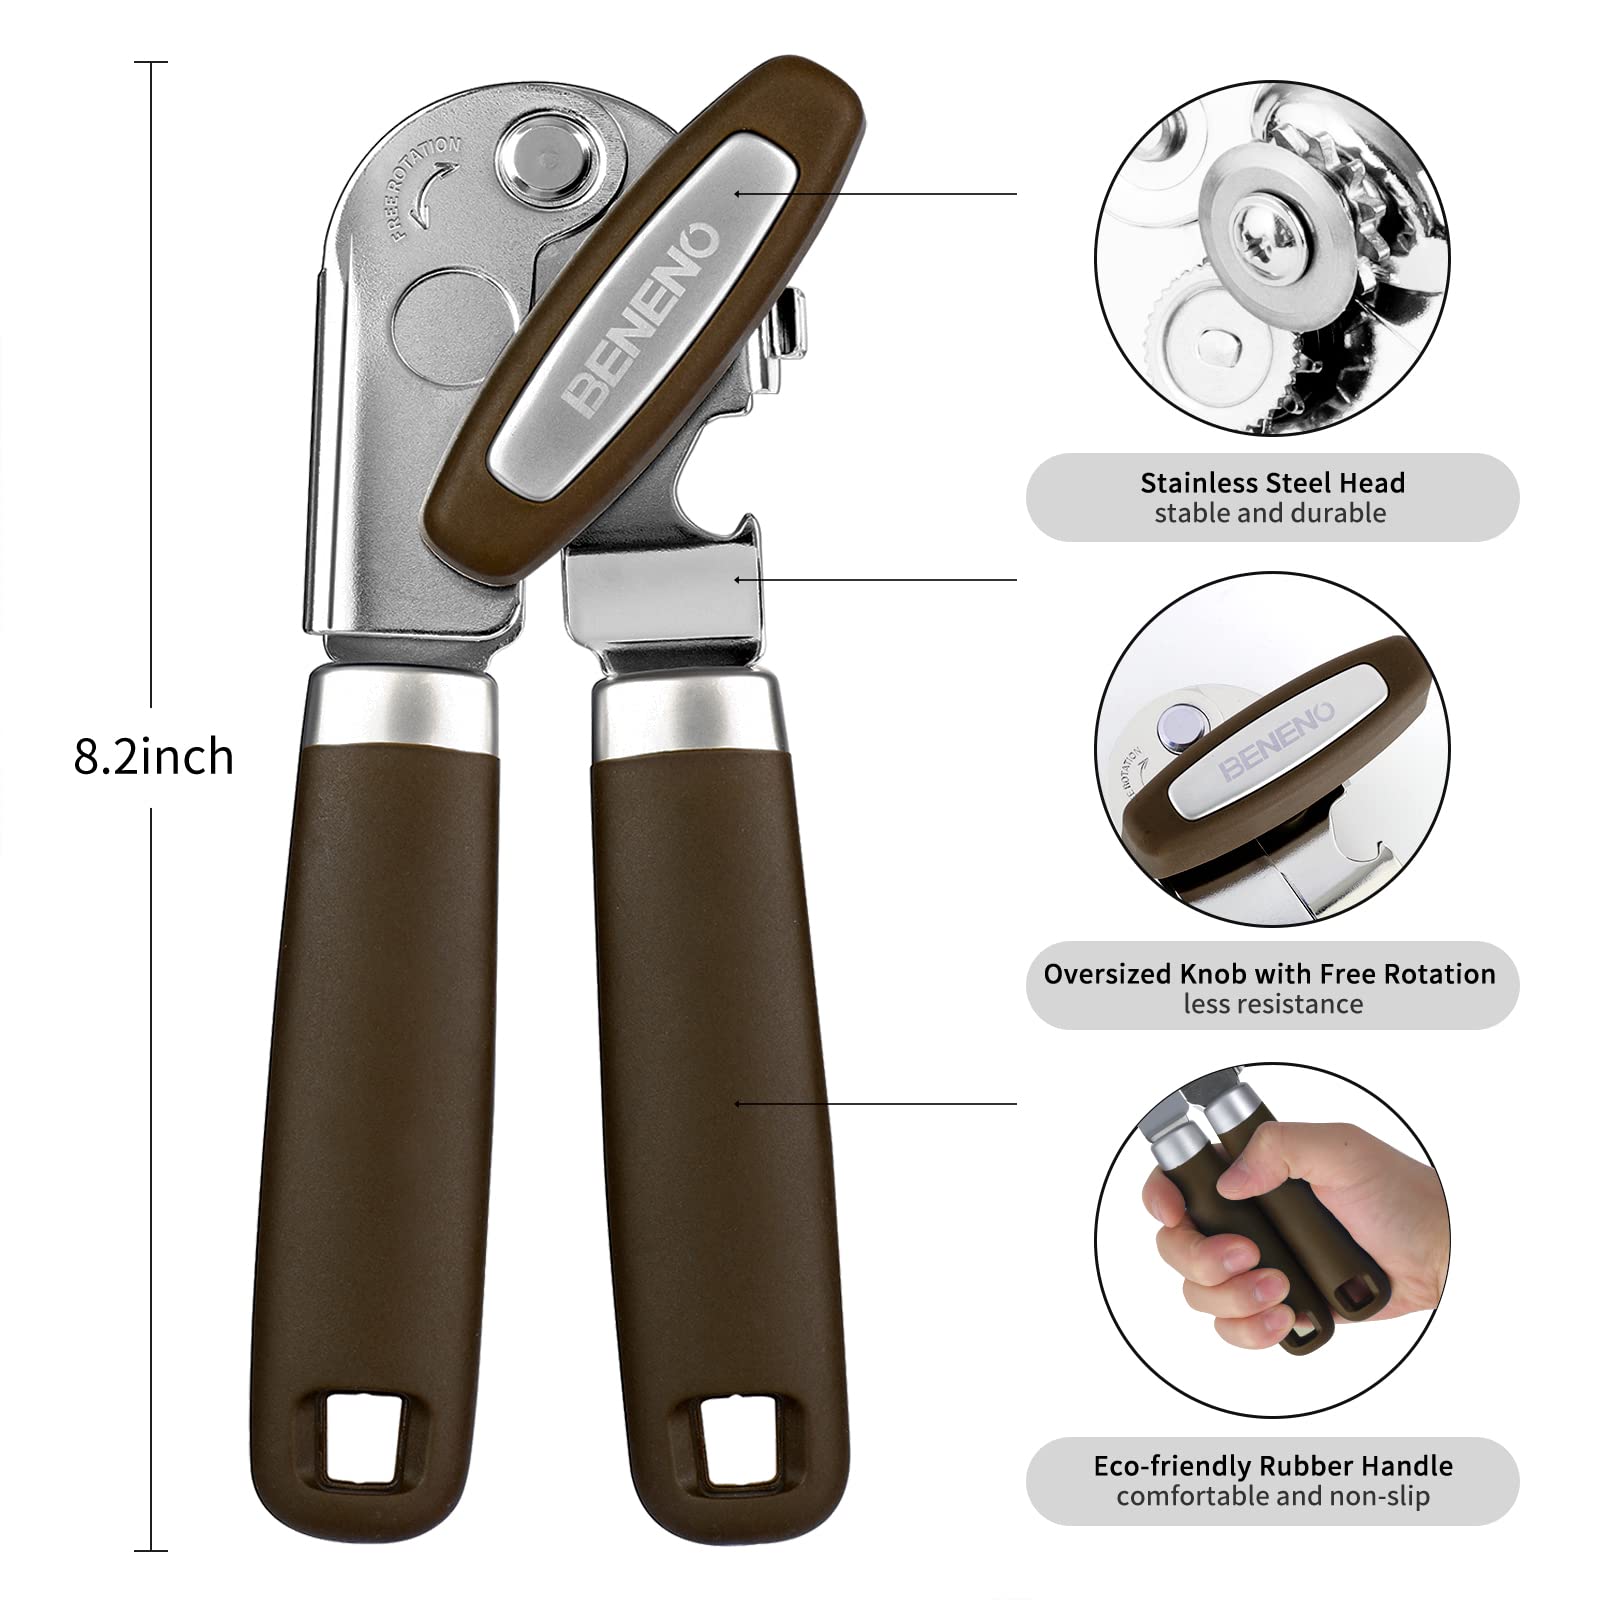 Can Opener Manual, Can Opener with Magnet, Hand Can Opener with Sharp Blade Smooth Edge, Handheld Can Openers with Big Effort-Saving Knob, Can Opener with Multifunctional Bottles Opener, Brown